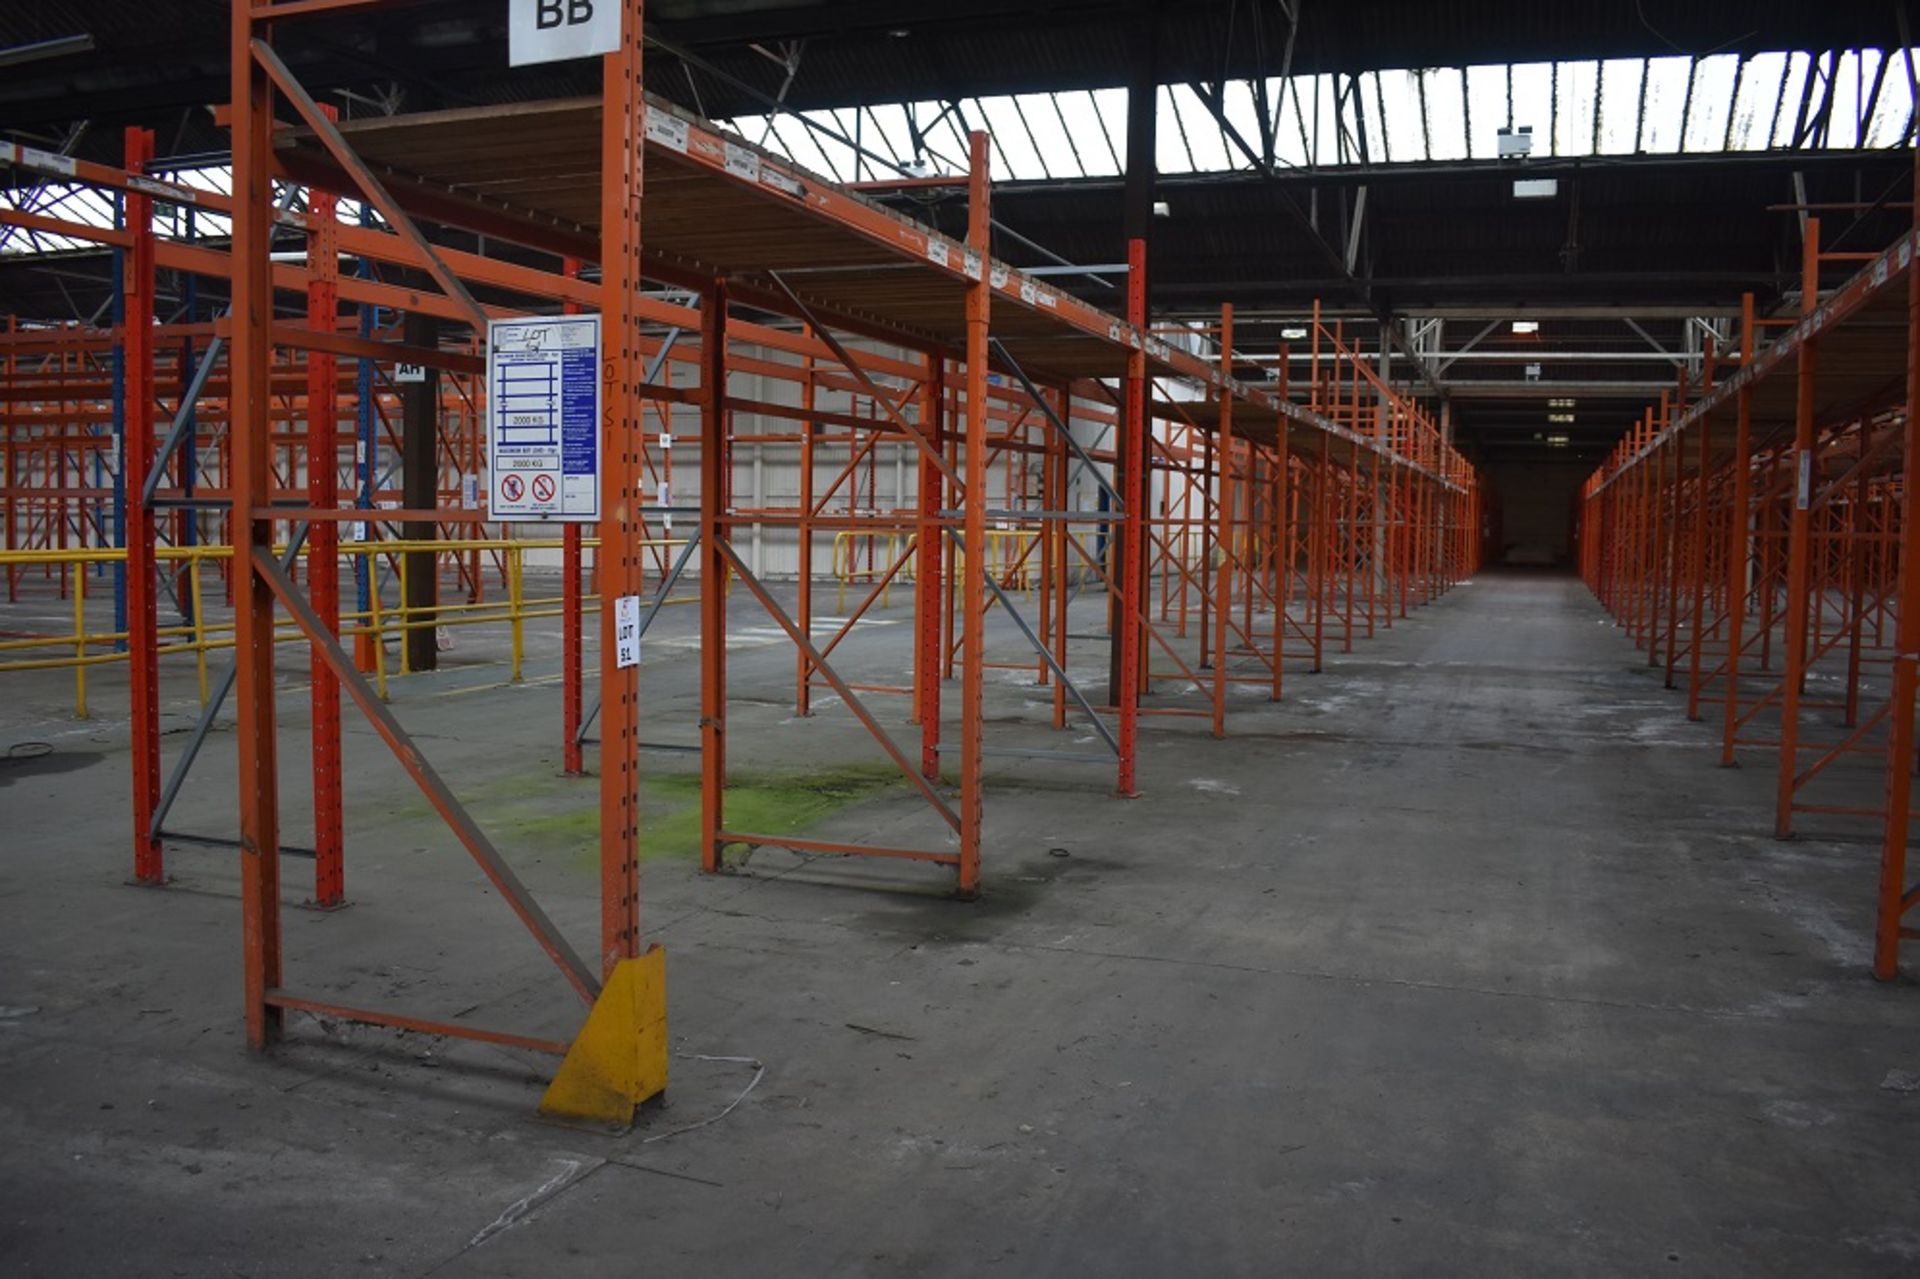 23 X BAYS OF 3 MTR HIGH BOLTLESS PALLET RACKING CONSISTING OF 47 BEAMS 24 X FRAMES - Image 2 of 2